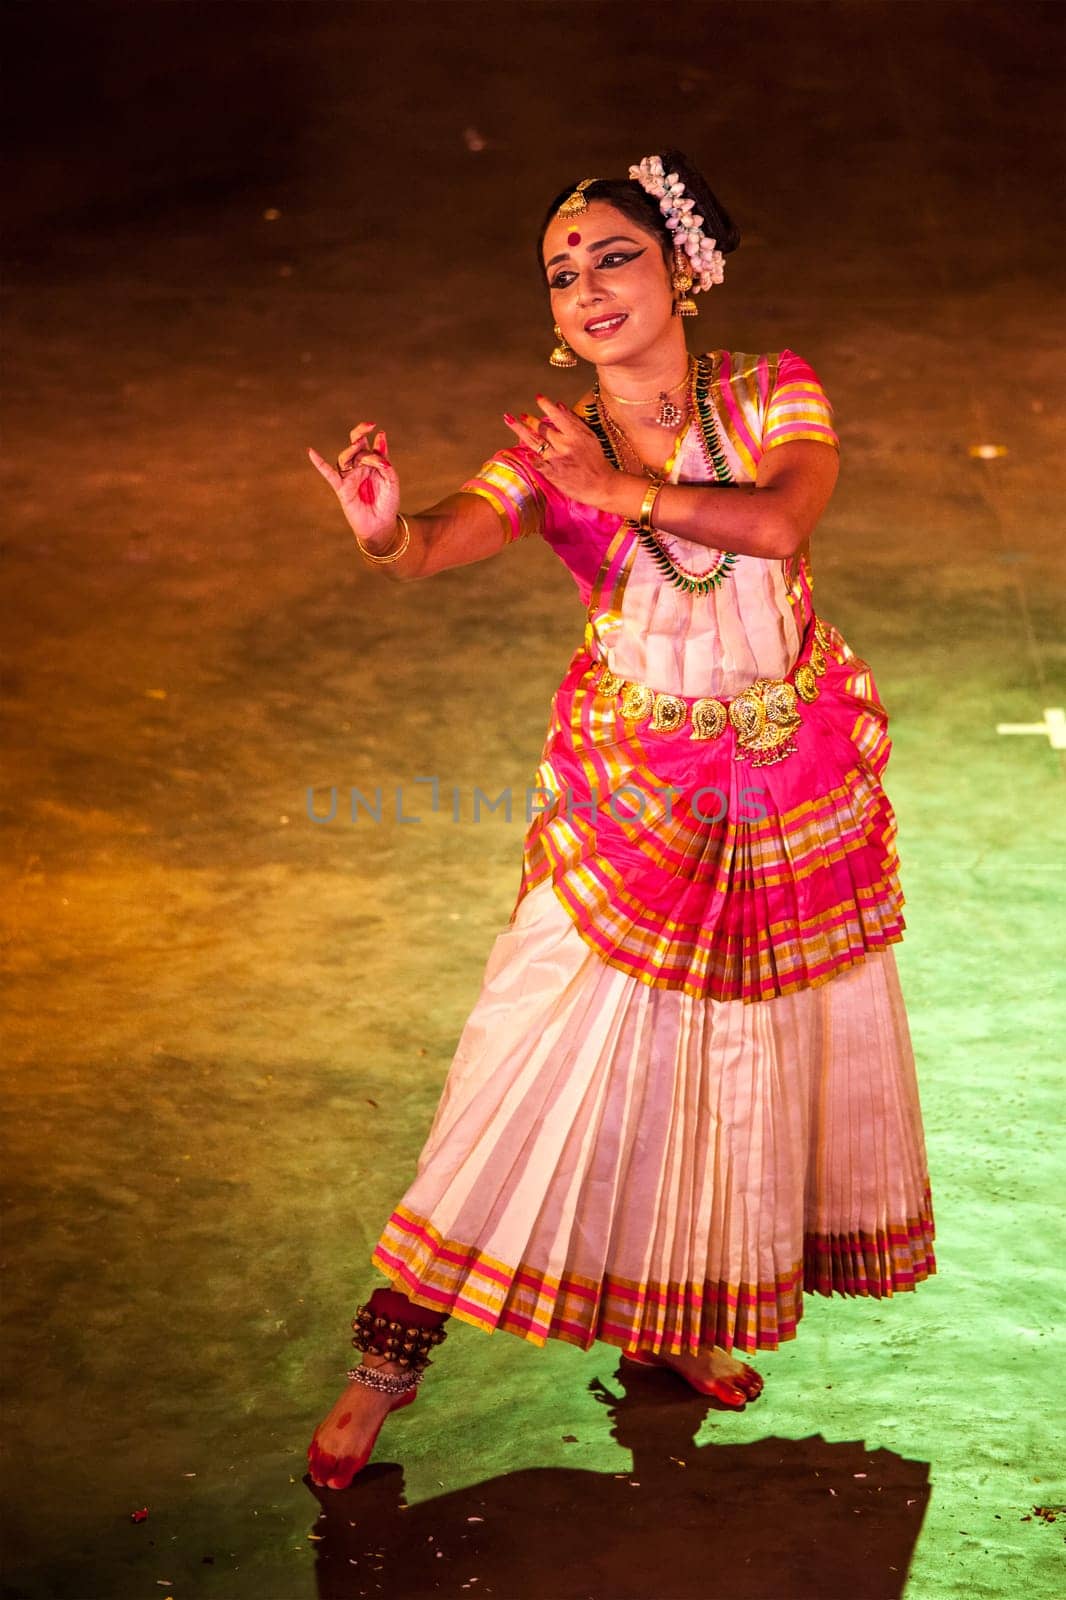 CHENNAI, INDIA - DECEMBER 12, 2010: Mohiniattam dance performed by female exponent on December 12, 2010 in Chennai, India. Mohiniattam is a classical Indian dance form originating in Kerala state